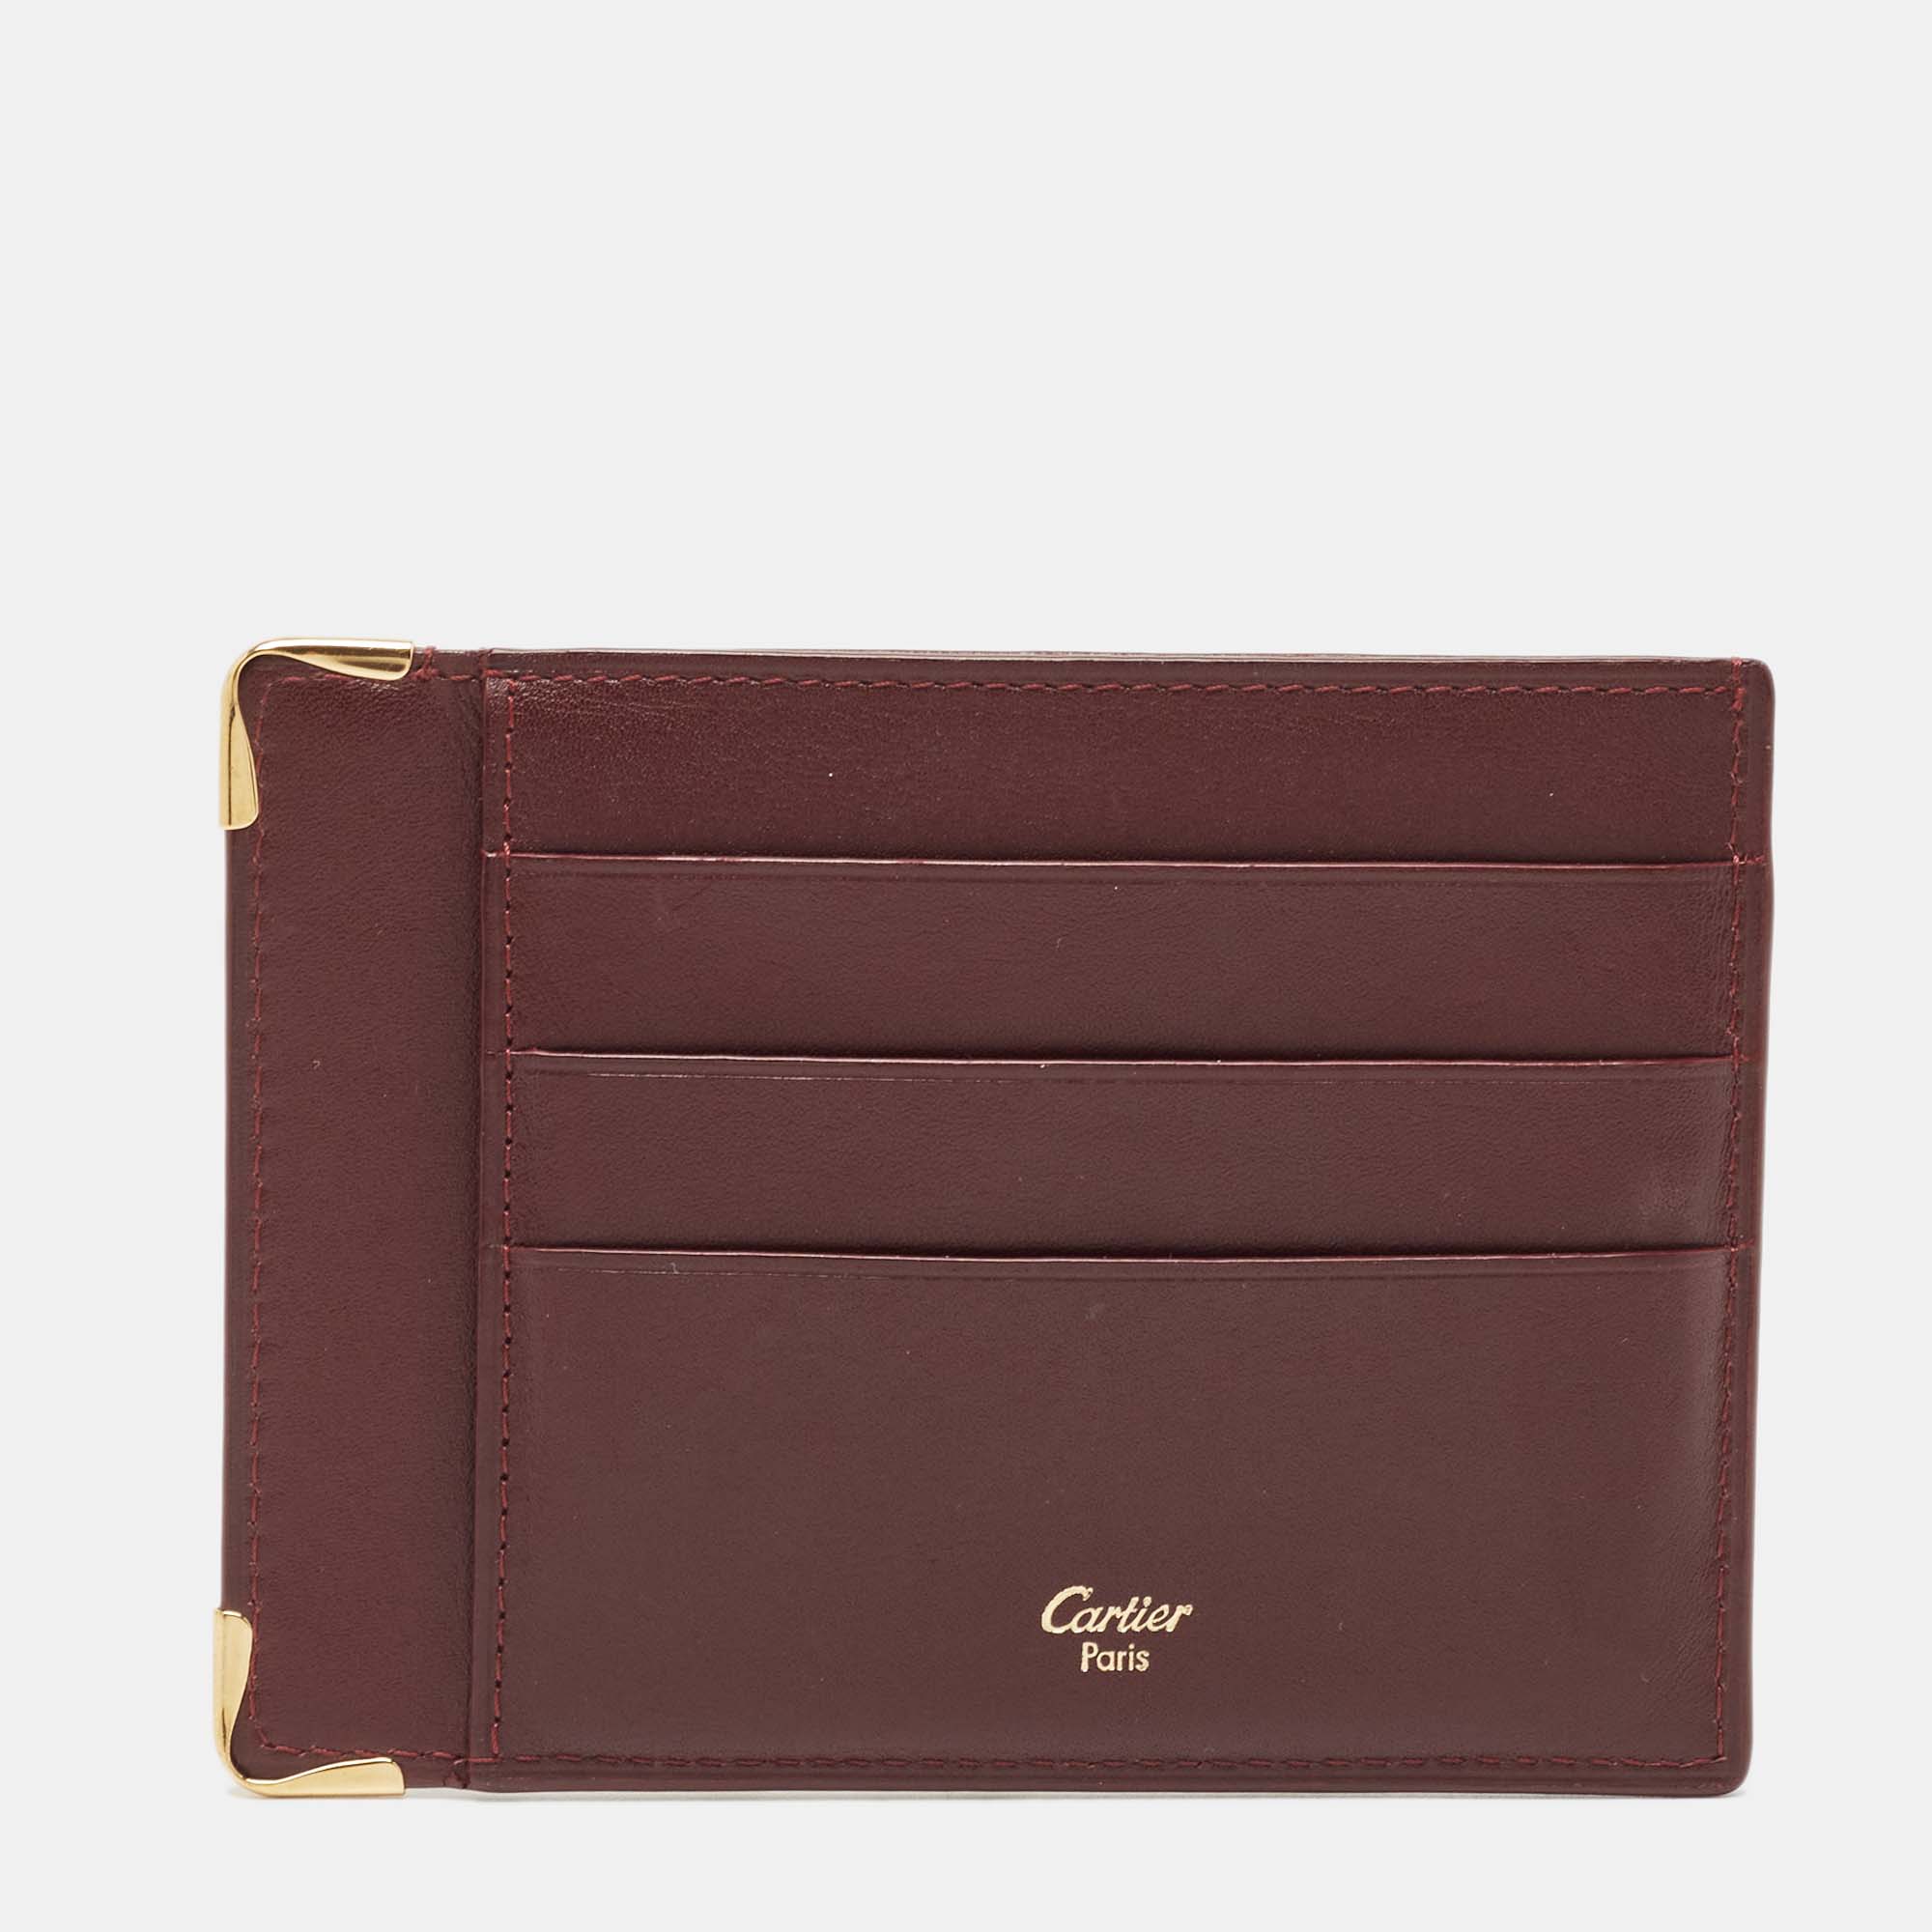 Pre-owned Cartier Burgundy Leather Card Holder